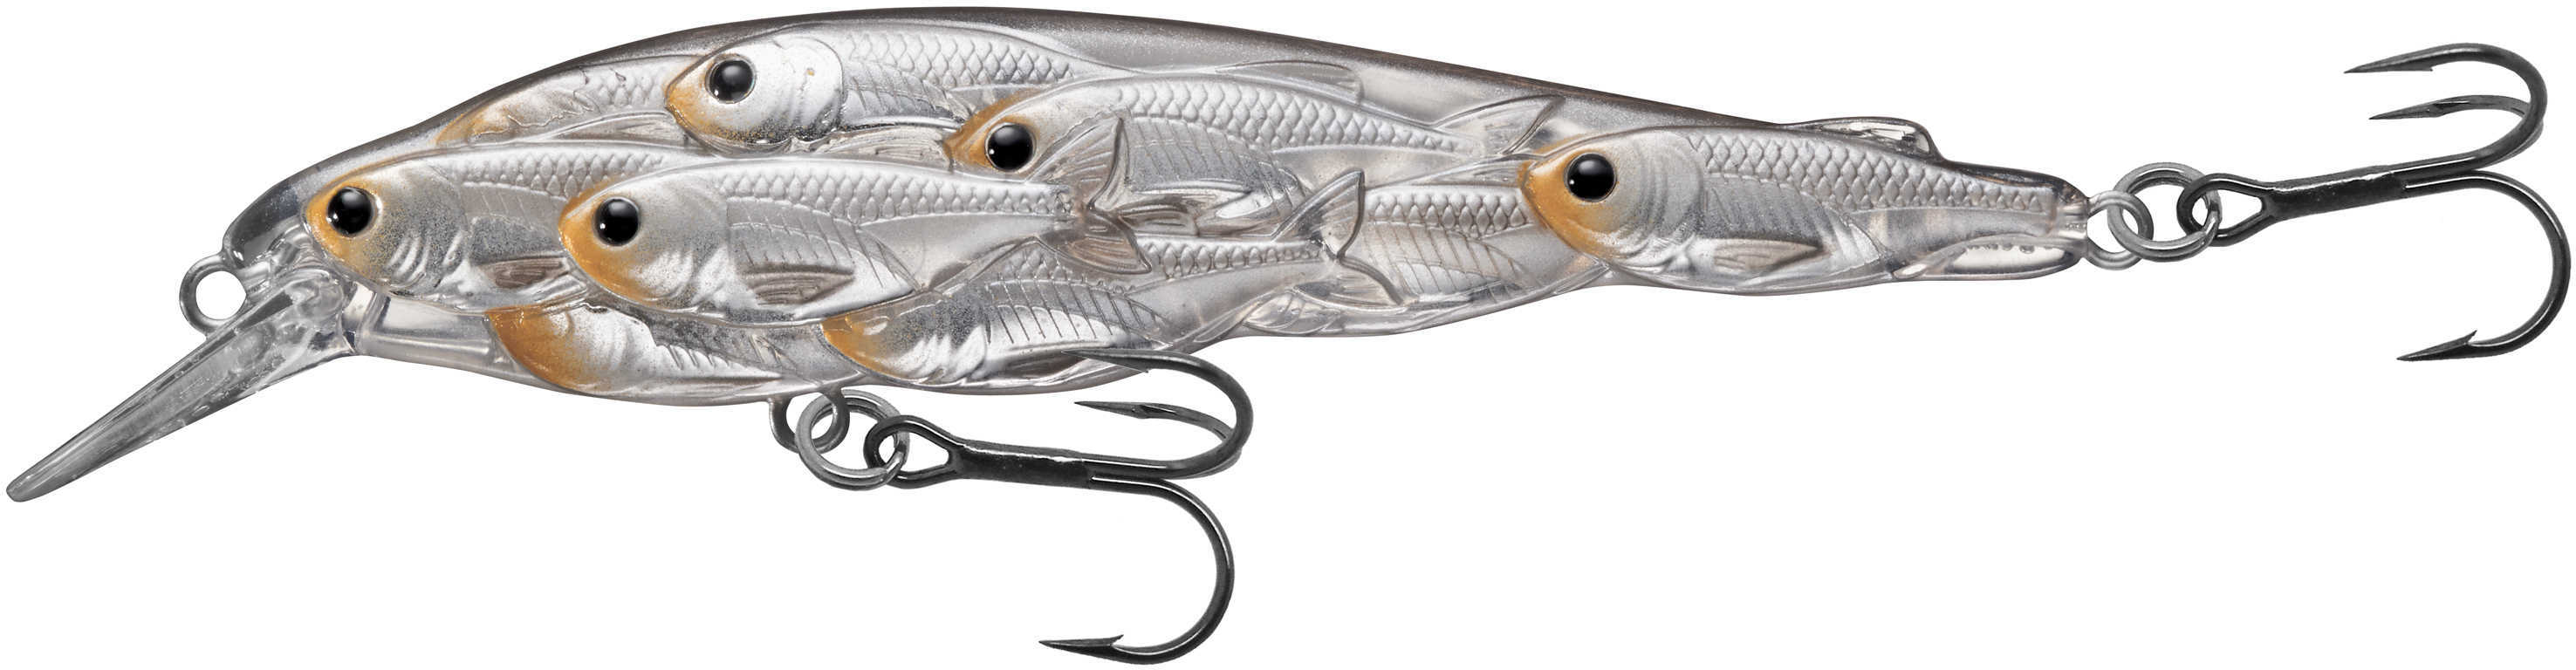 LIVETARGET Lures / Koppers Fishing and Tackle Corp Yearling Baitball  Jerkbait Pearl/Natural #4 Md: YJB95S816 - 11108637